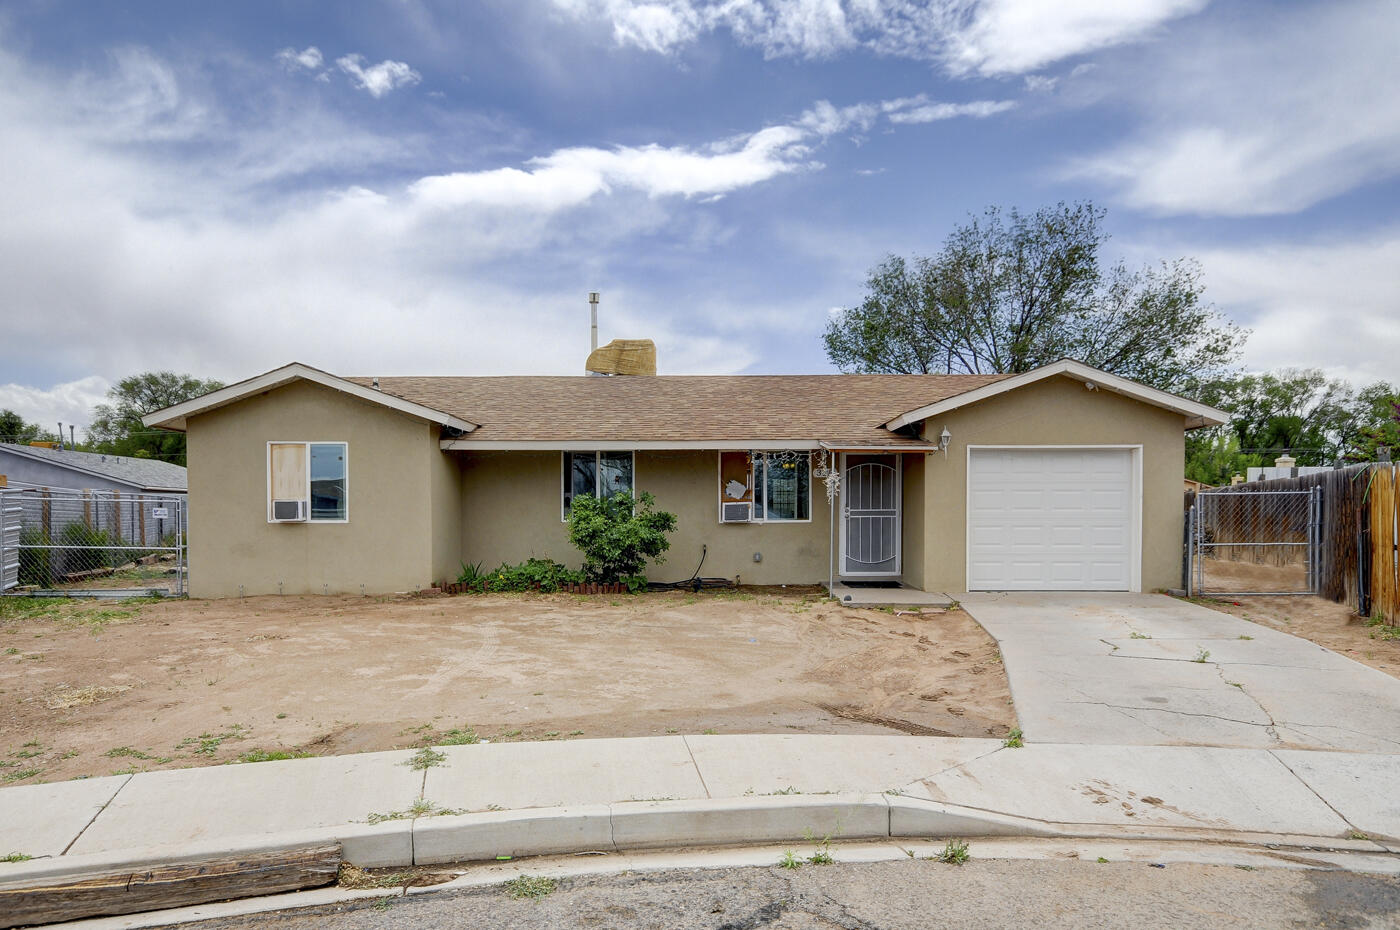 325 Calle Don Marcos NE, Los Lunas, New Mexico 87031, 3 Bedrooms Bedrooms, ,1 BathroomBathrooms,Residential,For Sale,325 Calle Don Marcos NE,1062069